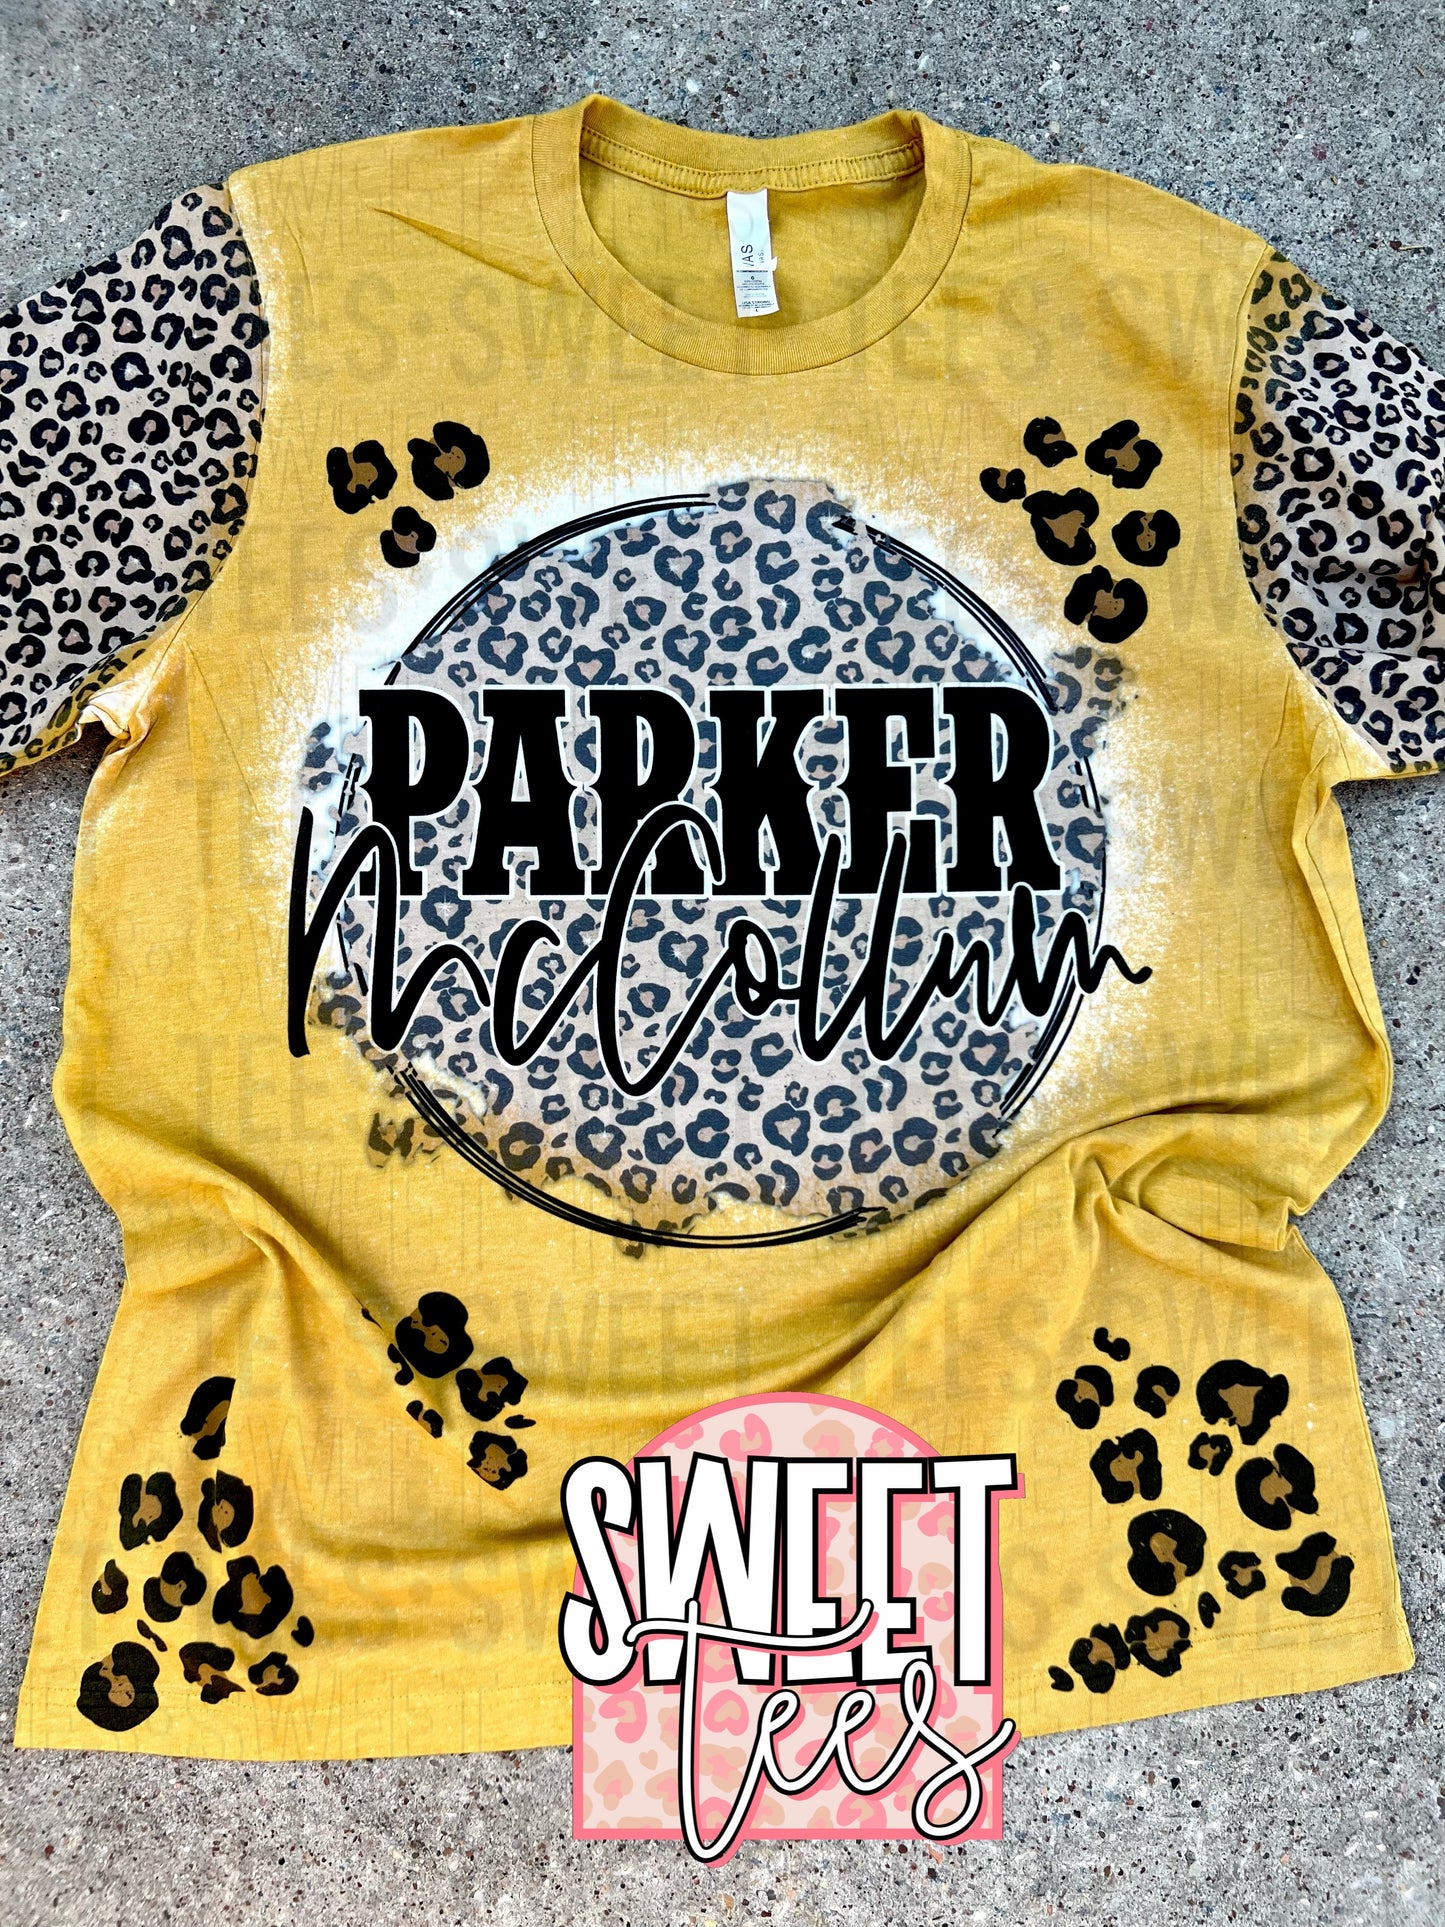 Parker Leopard tee - extra